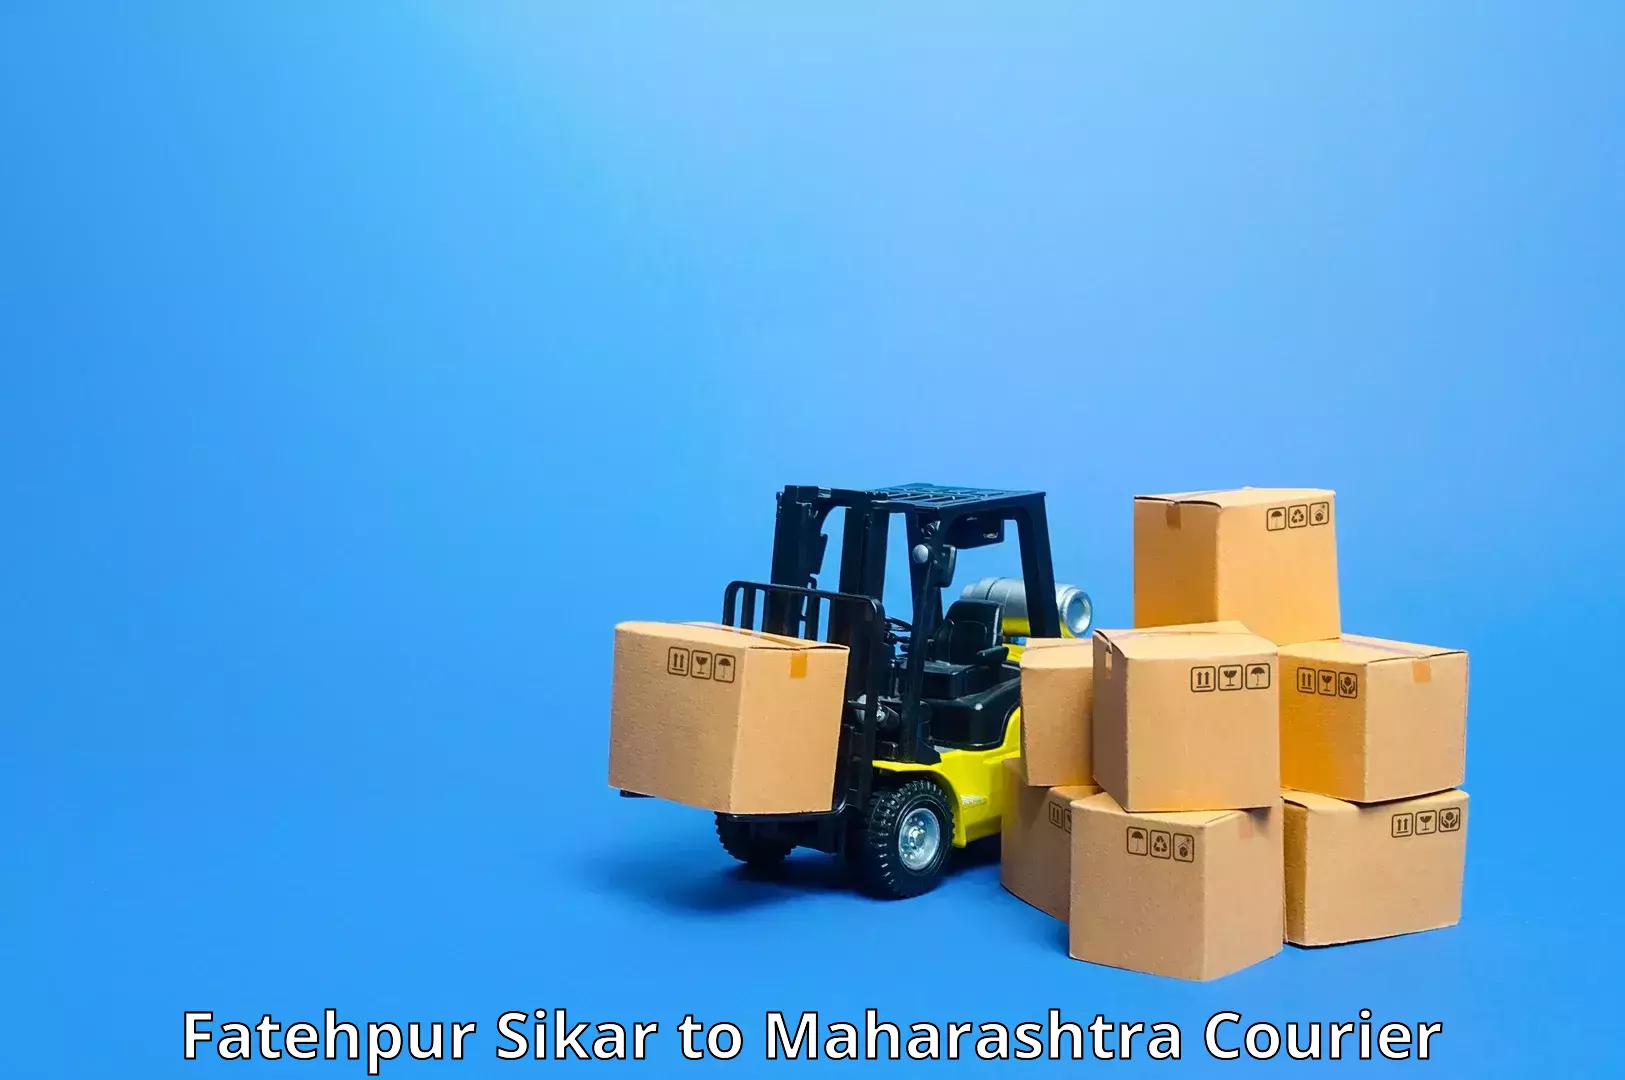 Fast delivery service Fatehpur Sikar to Mumbai Port